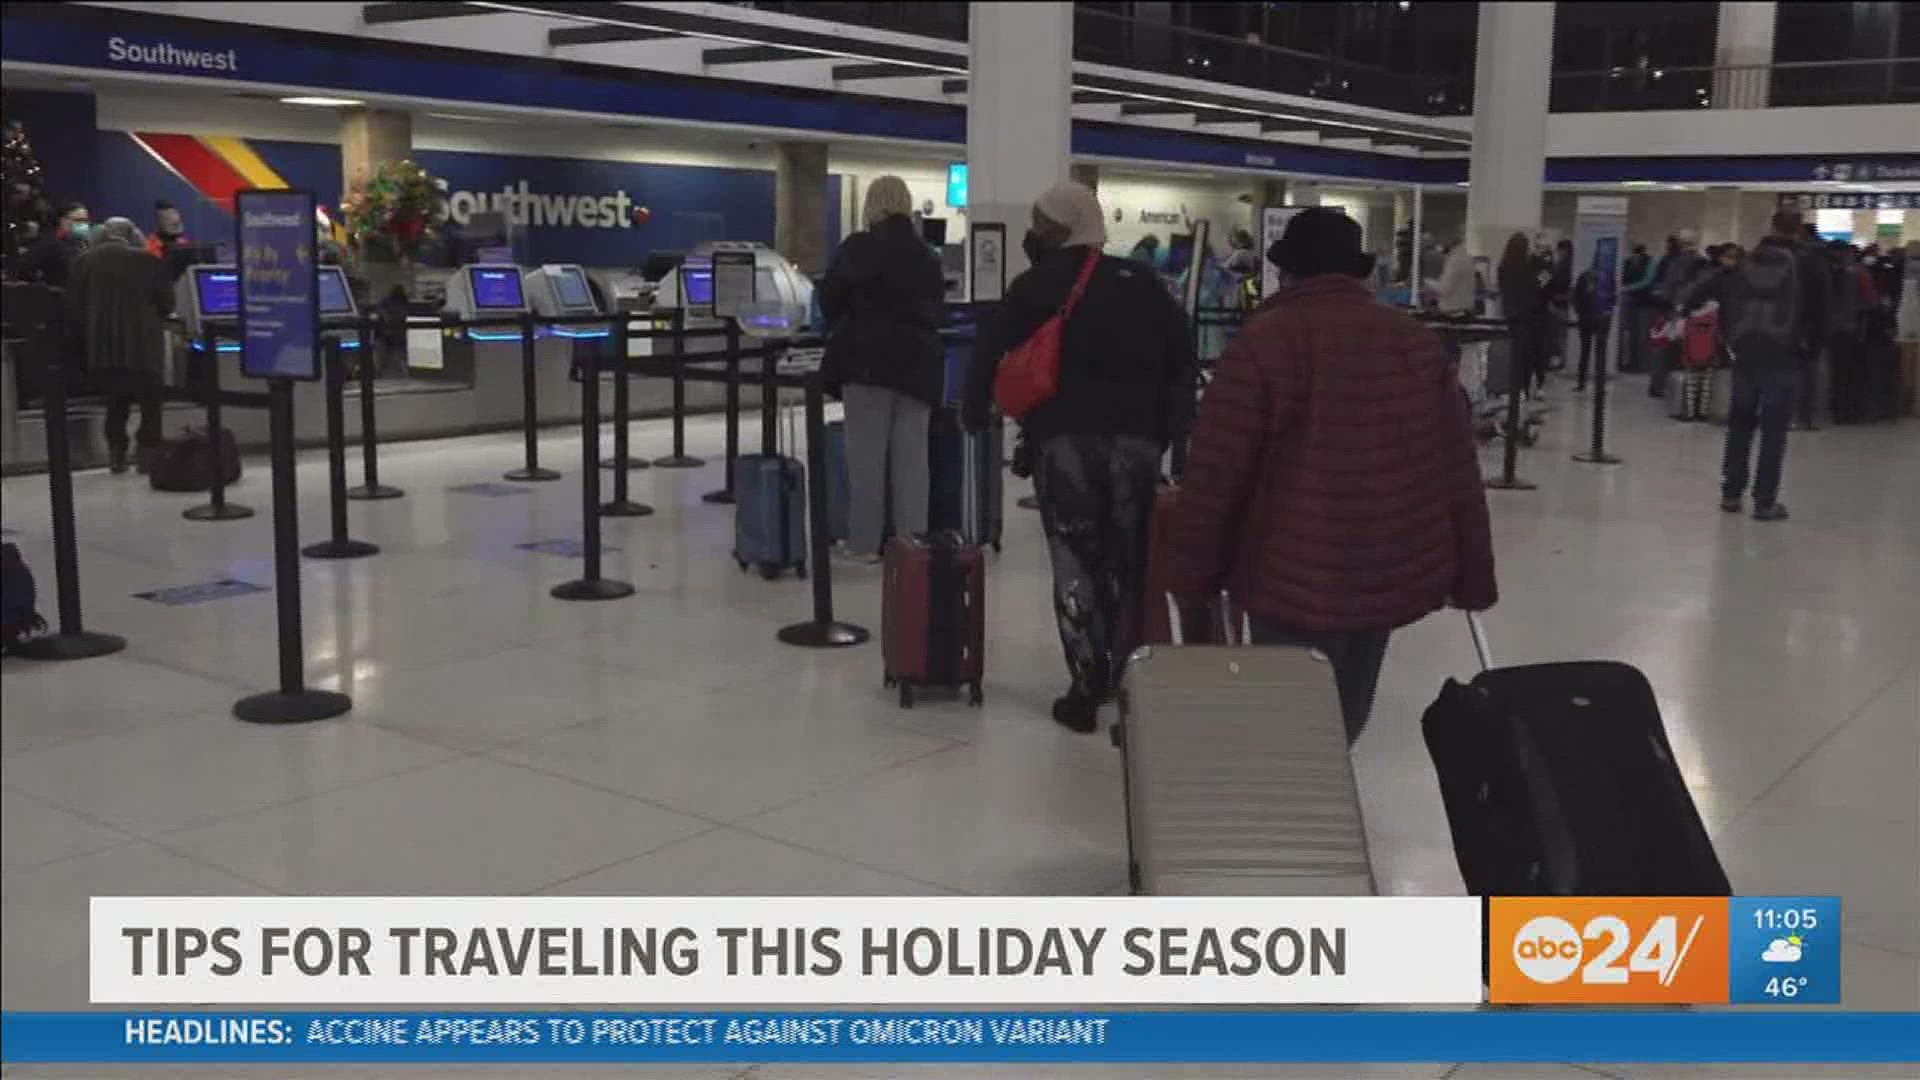 The airport said its peak day will be Thursday, December 23 with more than 8,000 travelers